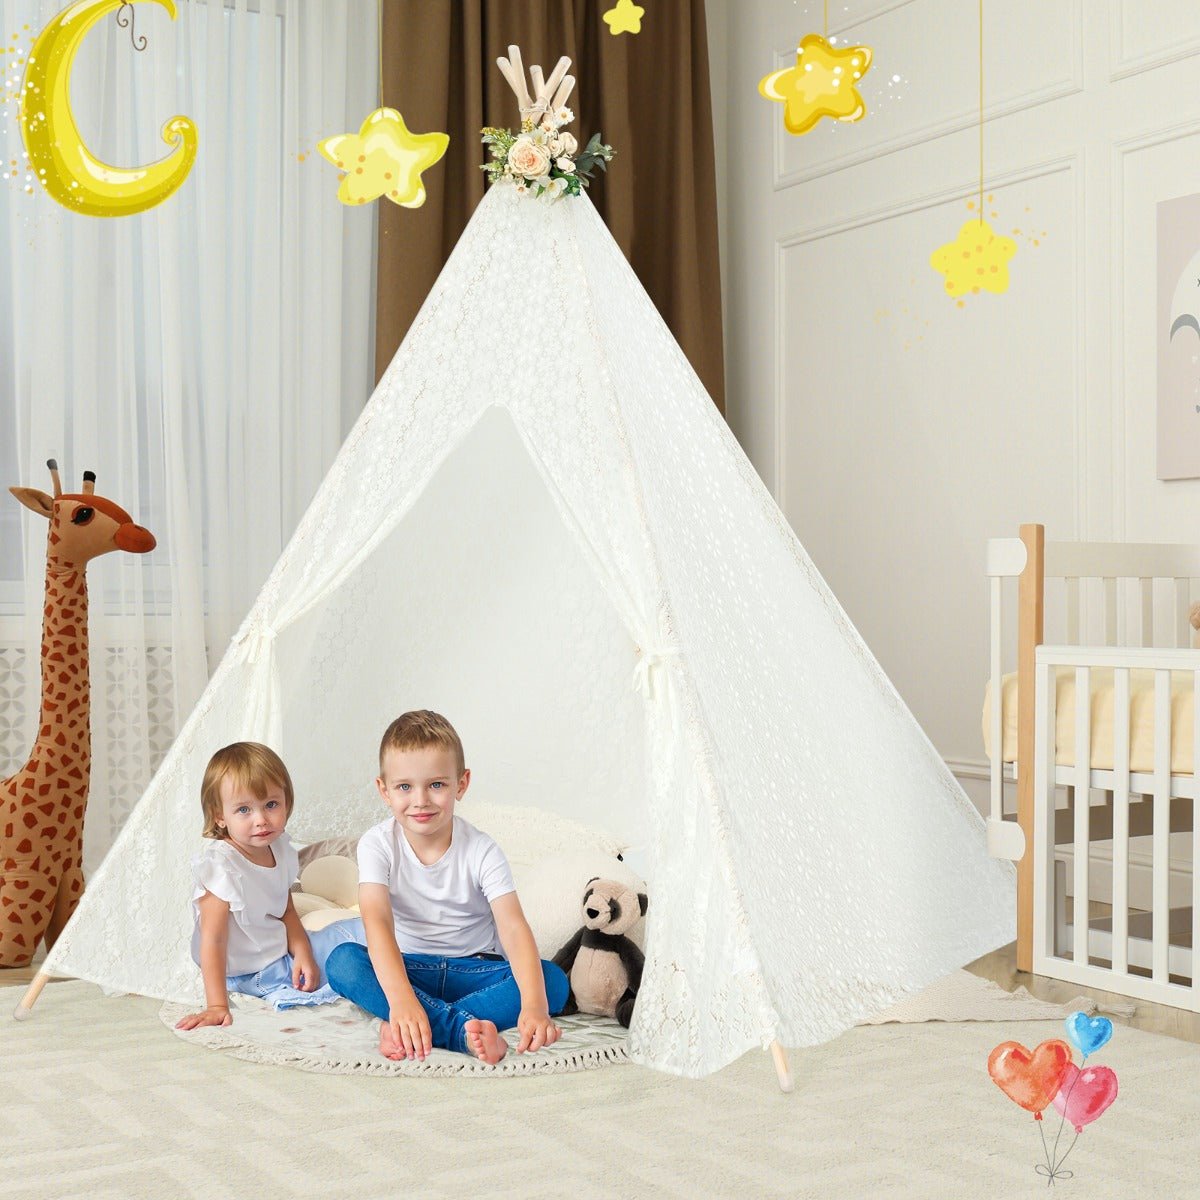 Cozy Retreat: 5-Side Lace Teepee Tent with colourful Lights for All Ages